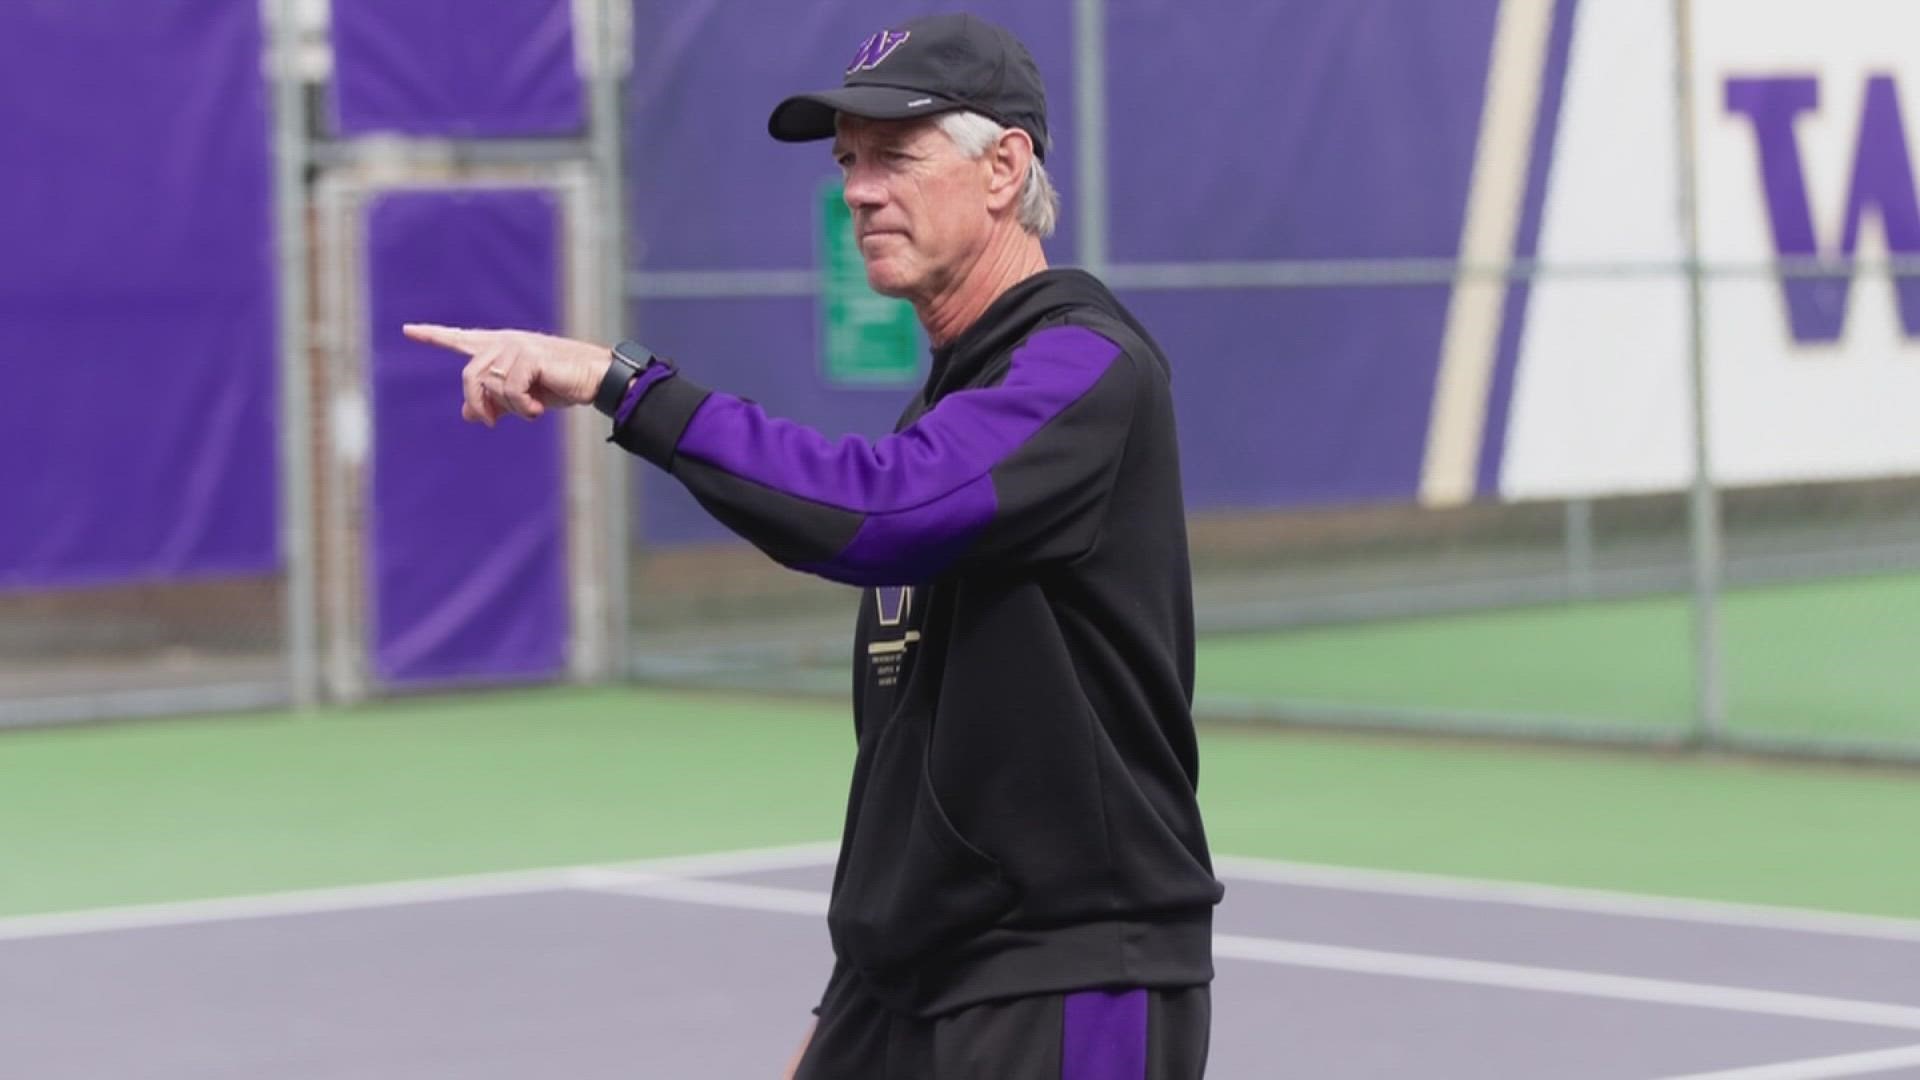 The second-longest tenured coach at the University of Washington announced he'll be retiring after this season.